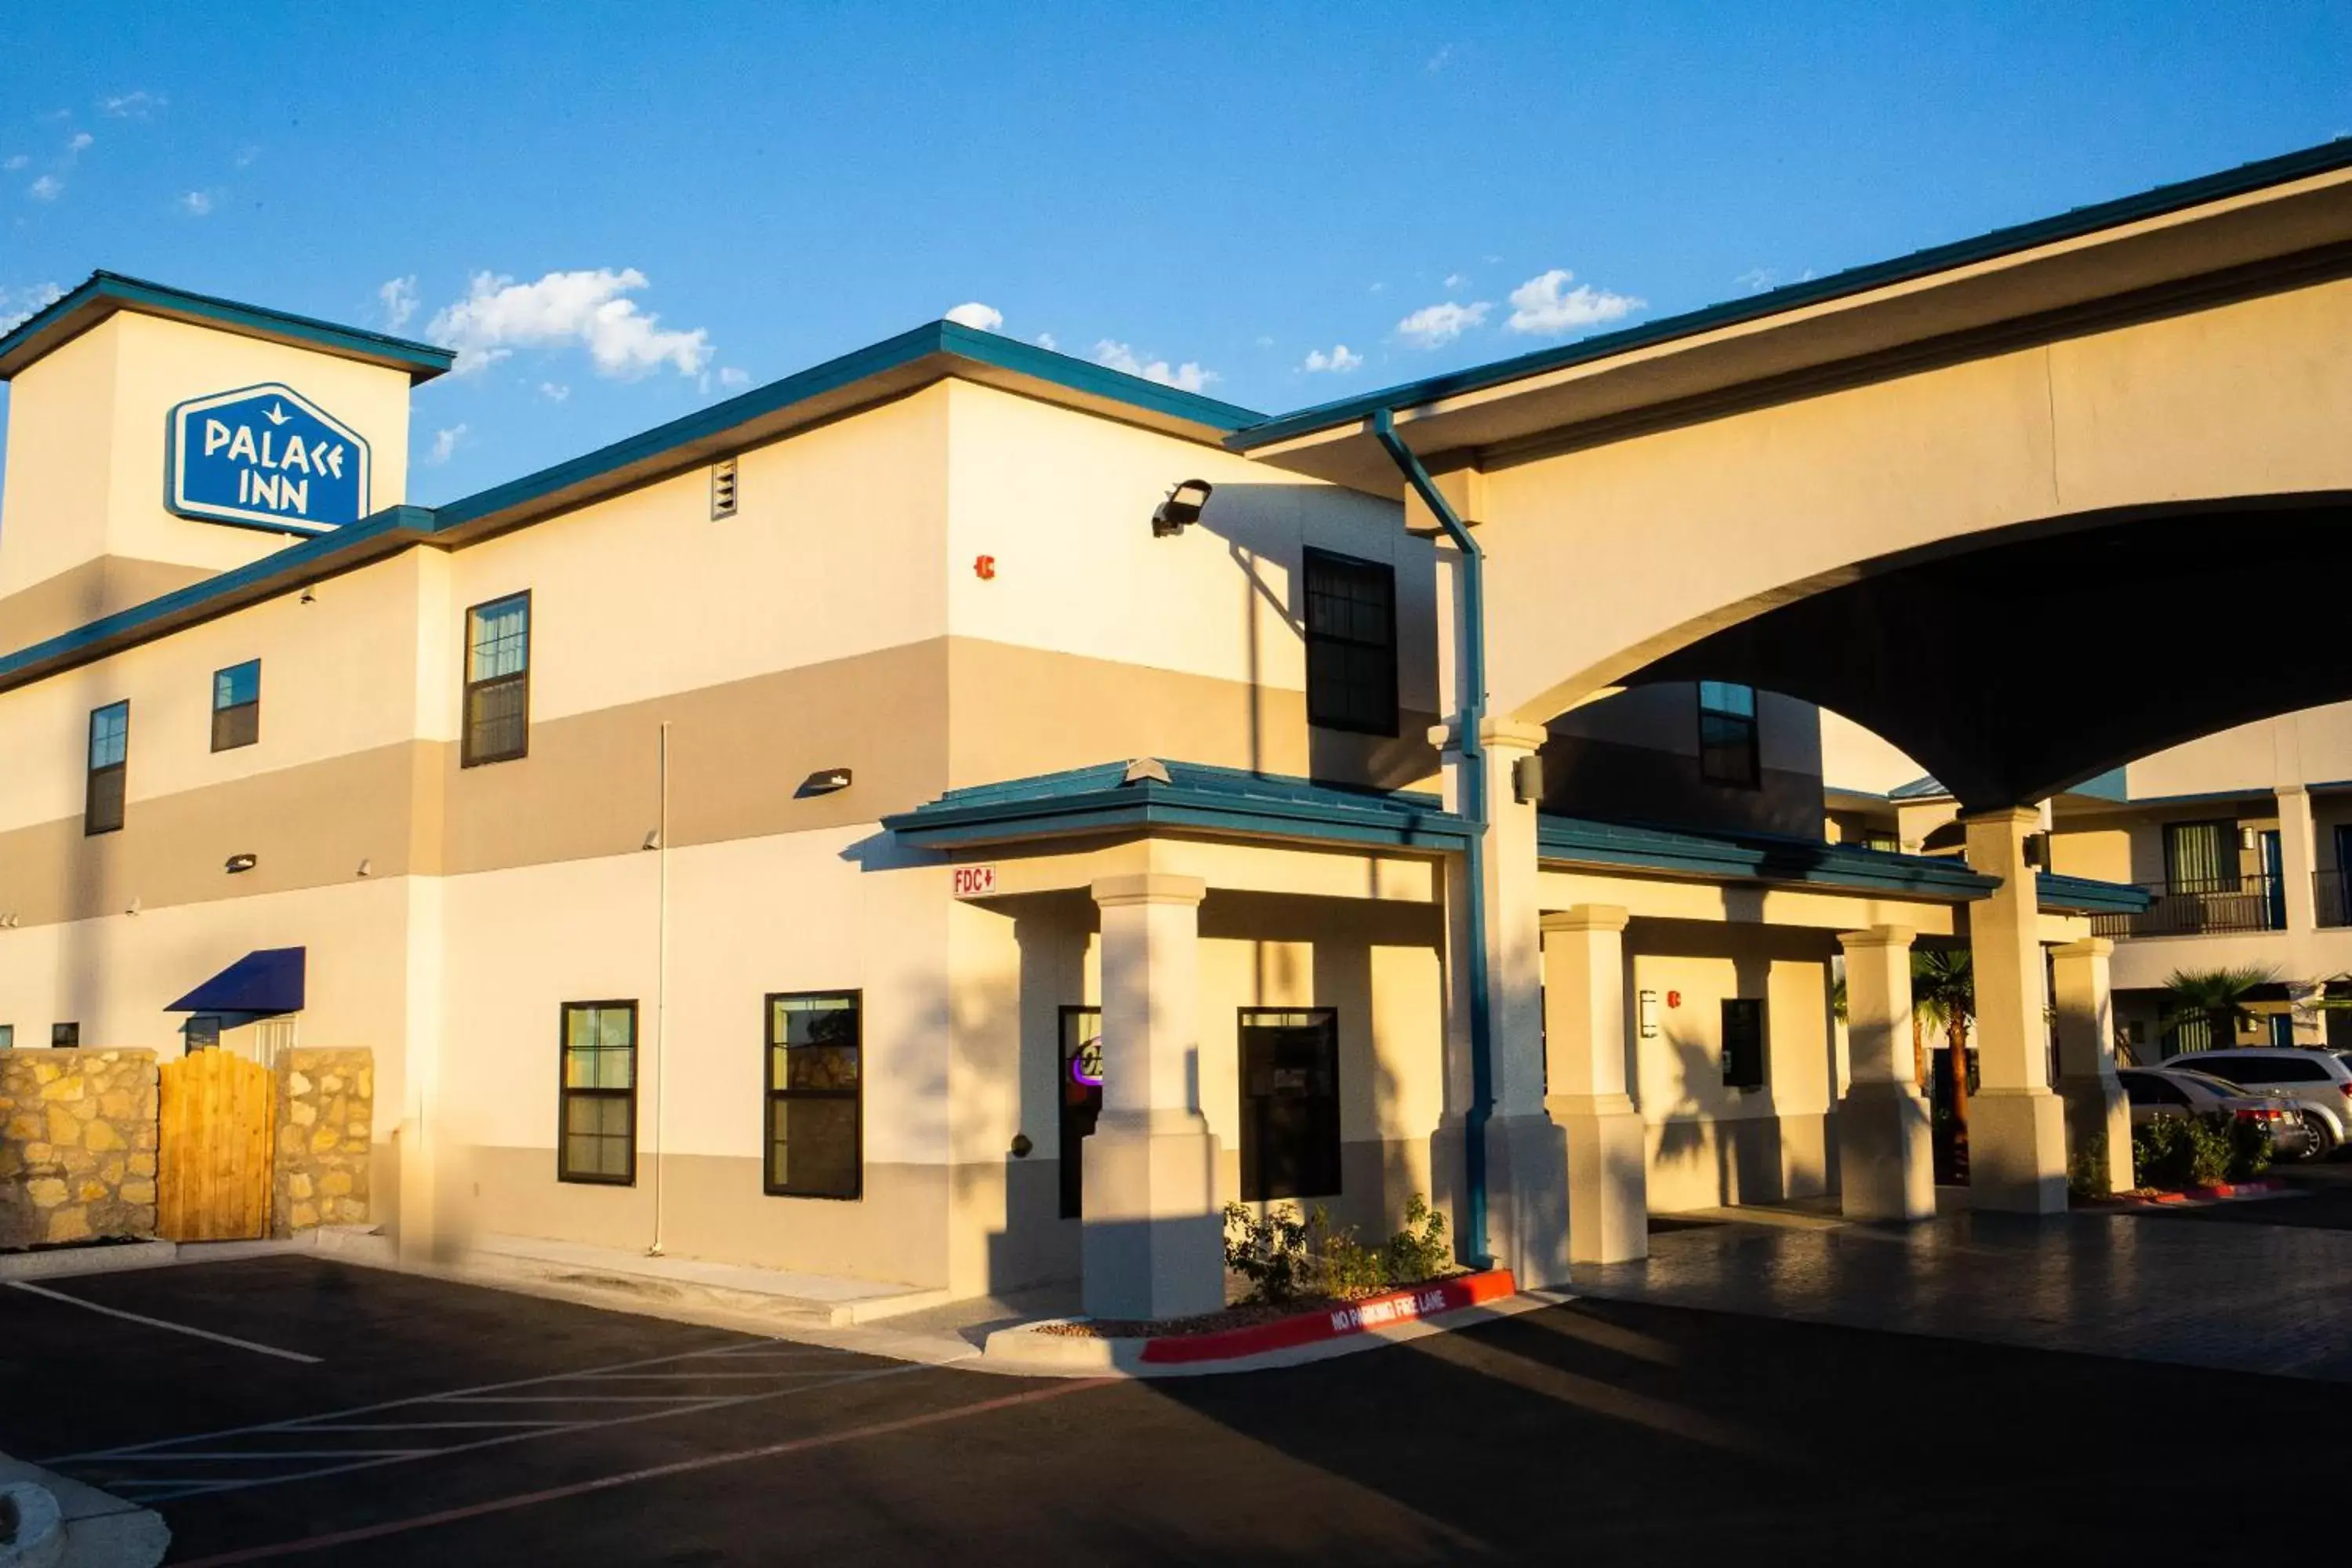 Property Building in Palace Inn El Paso